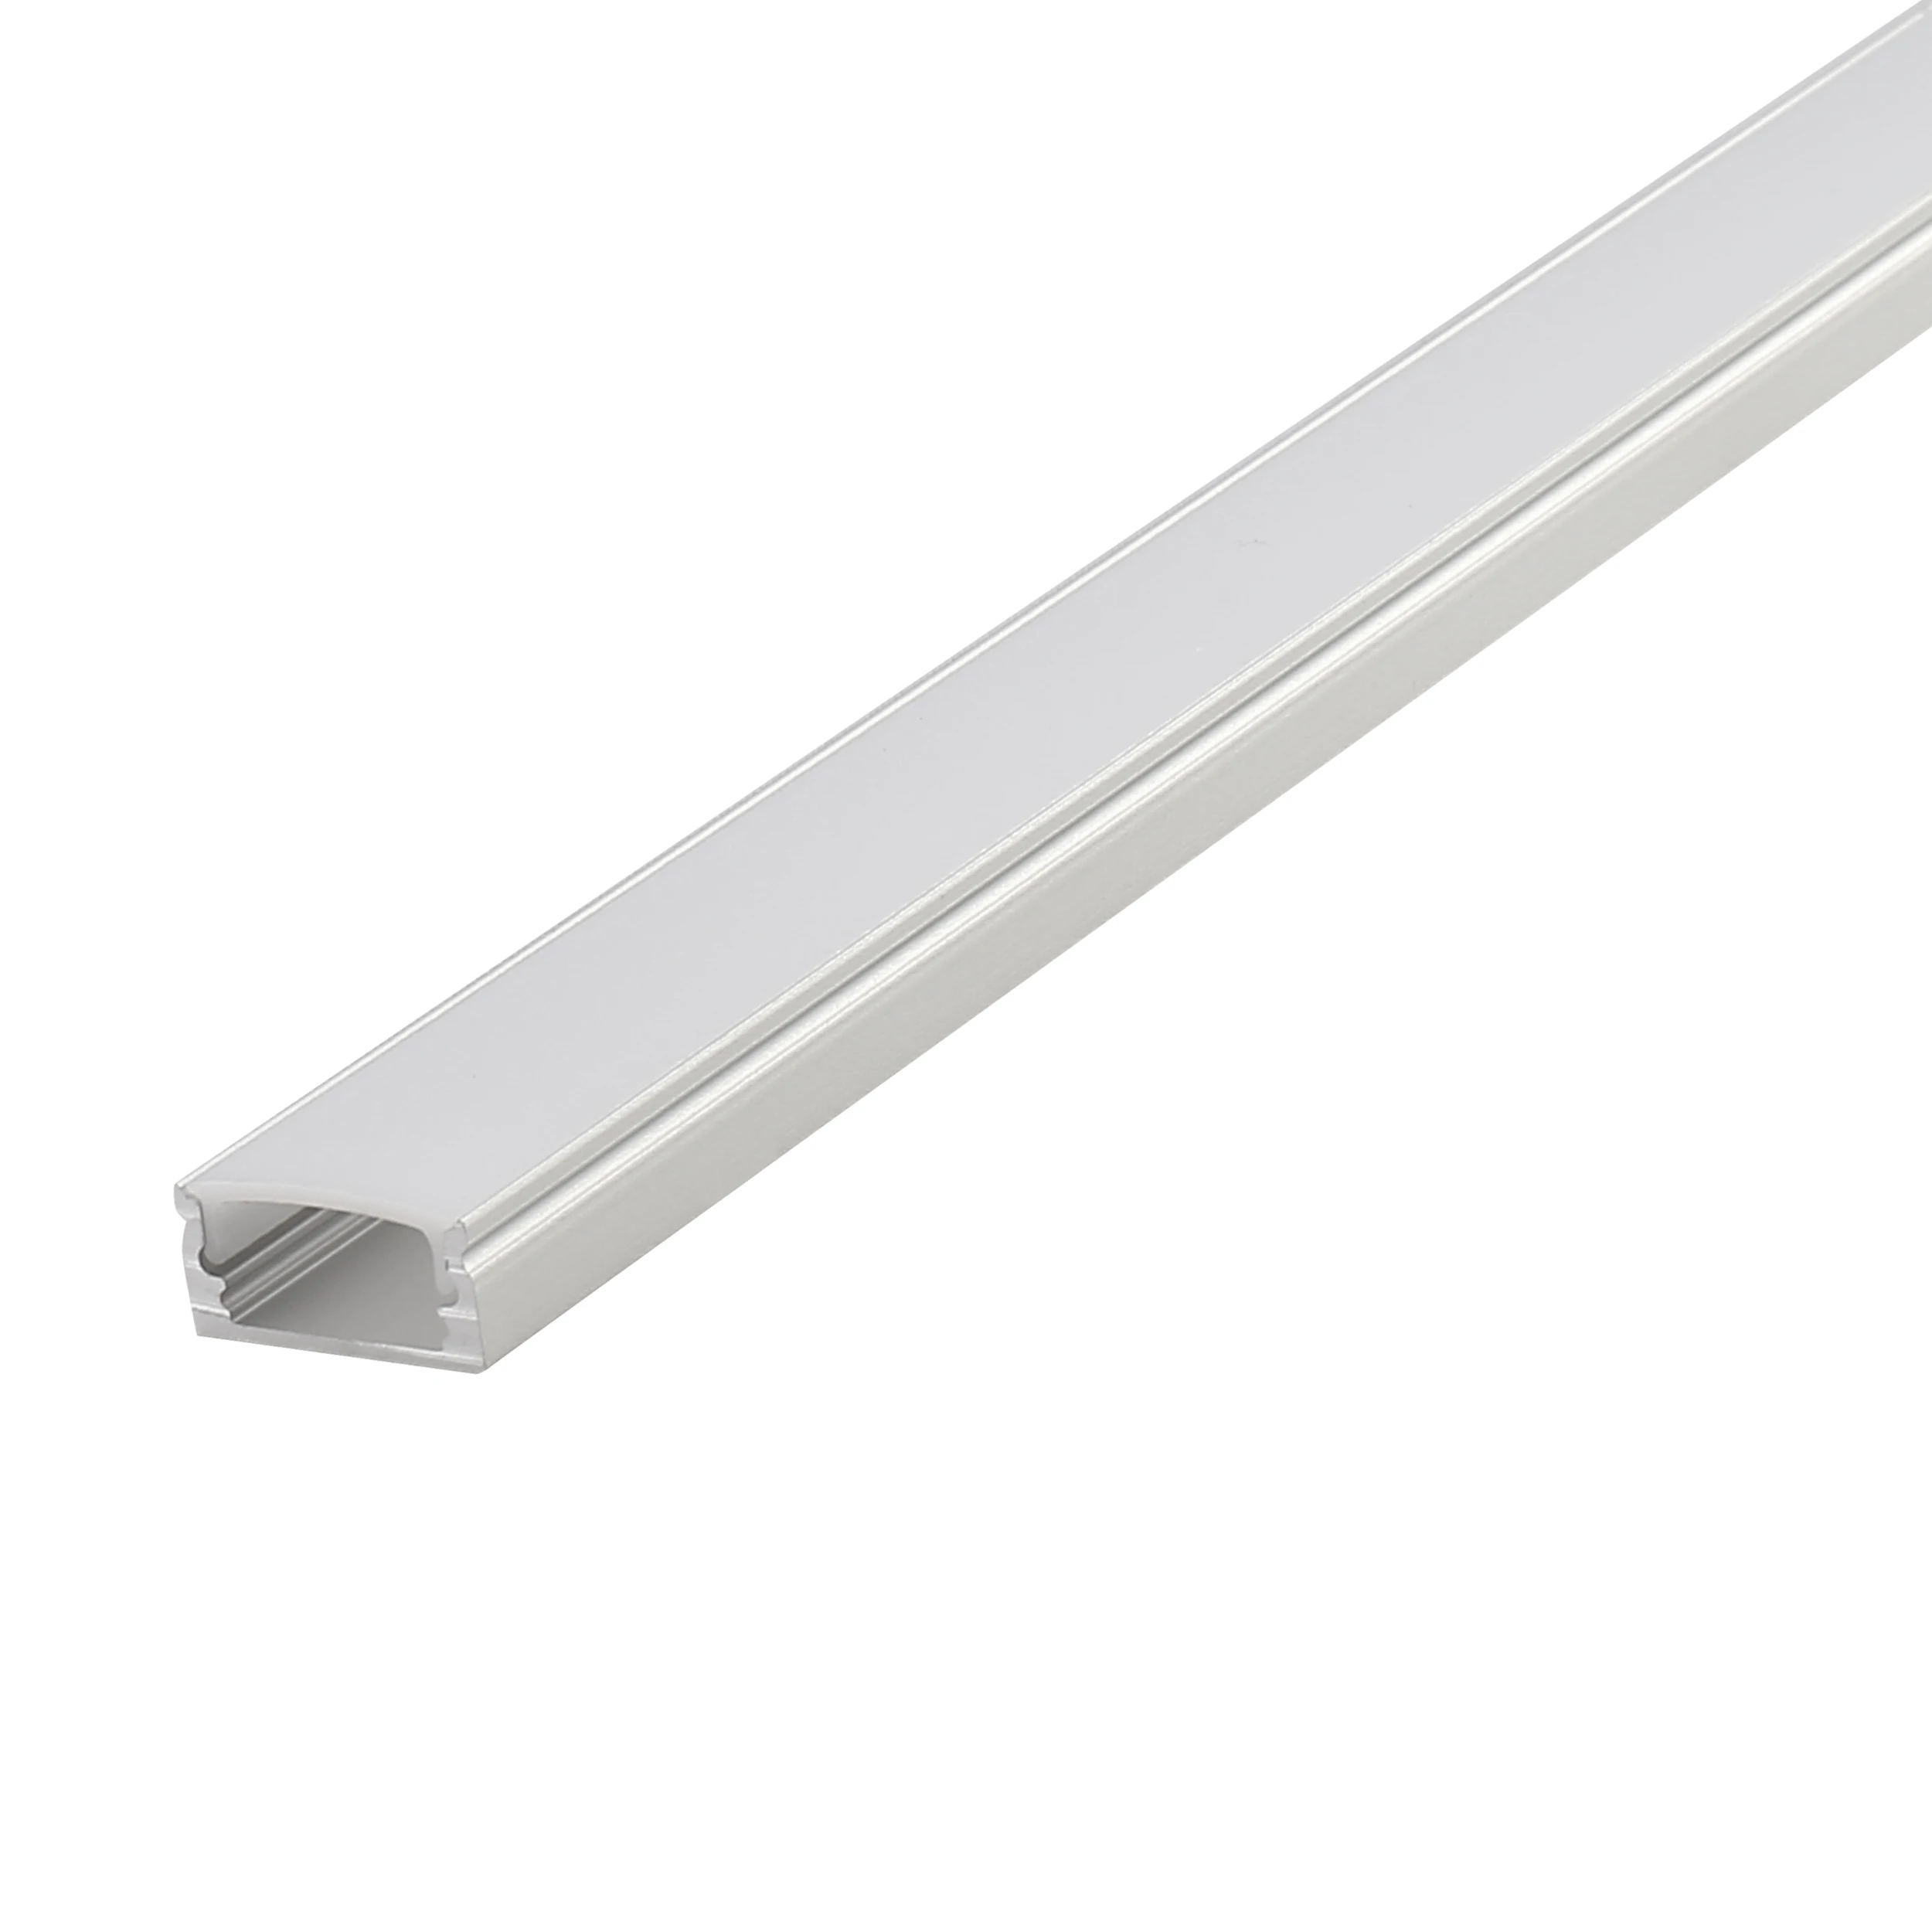 Hot sales and  high quality square shape led aluminum extrusion profile